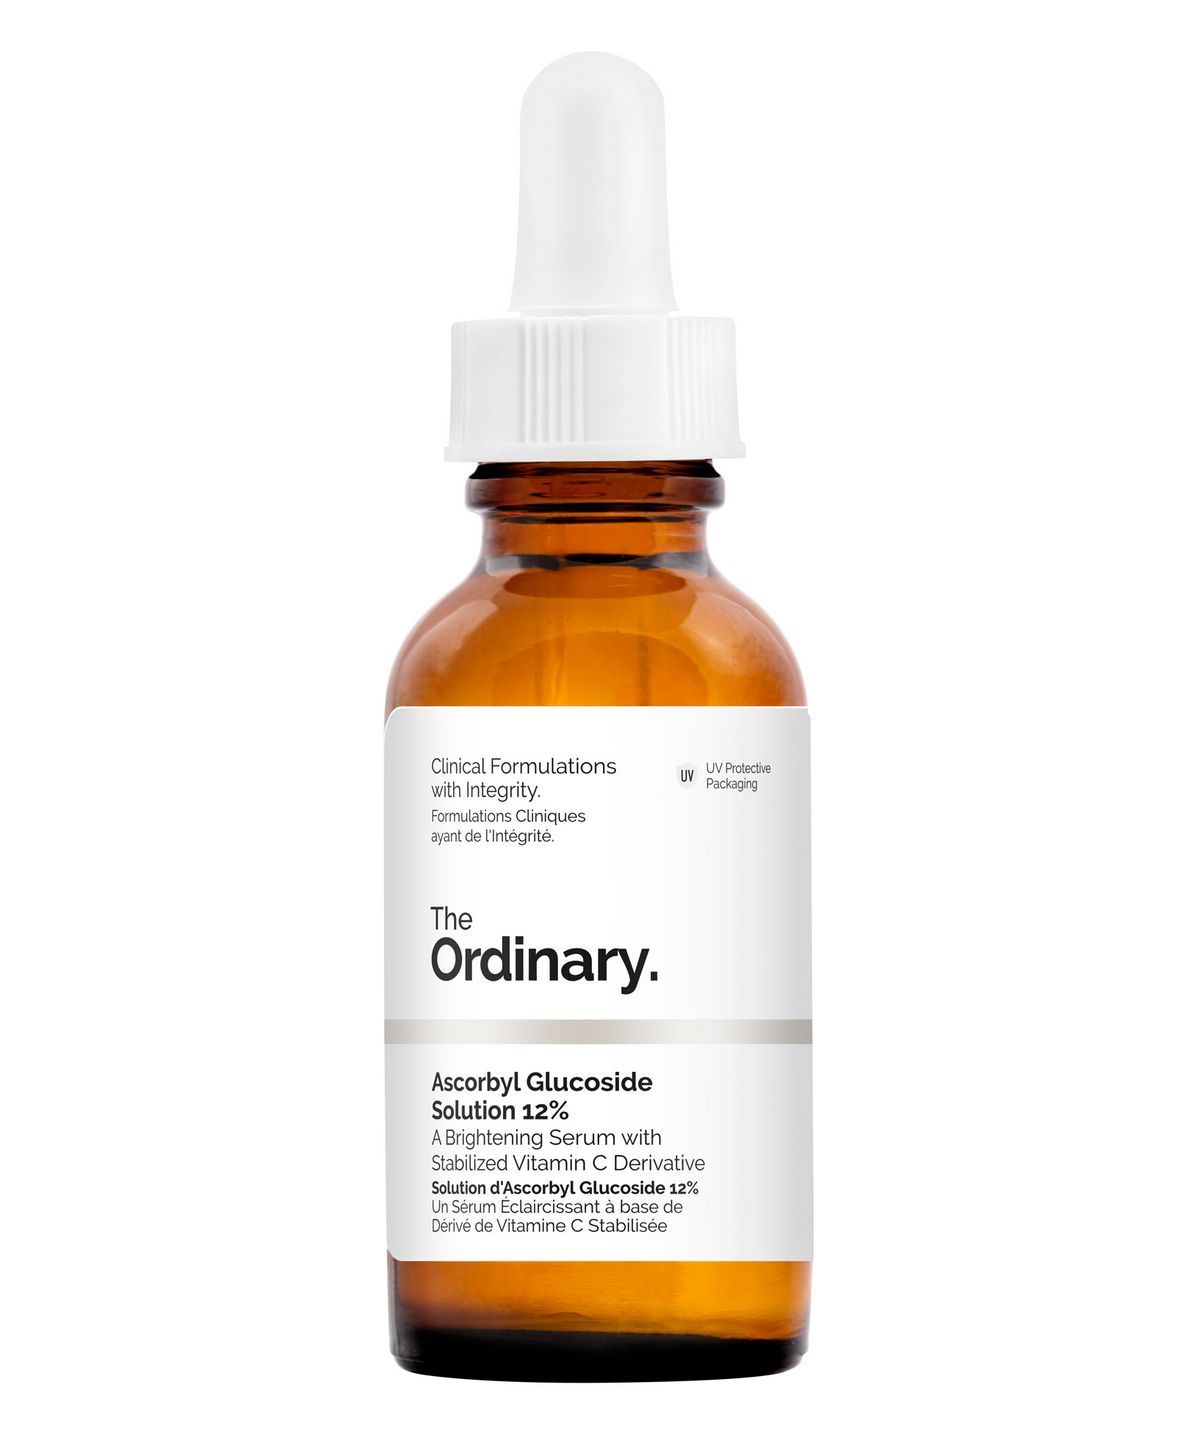 Ascorbyl Glucoside Solution 12% by The Ordinary in UAE at Shopey.ae